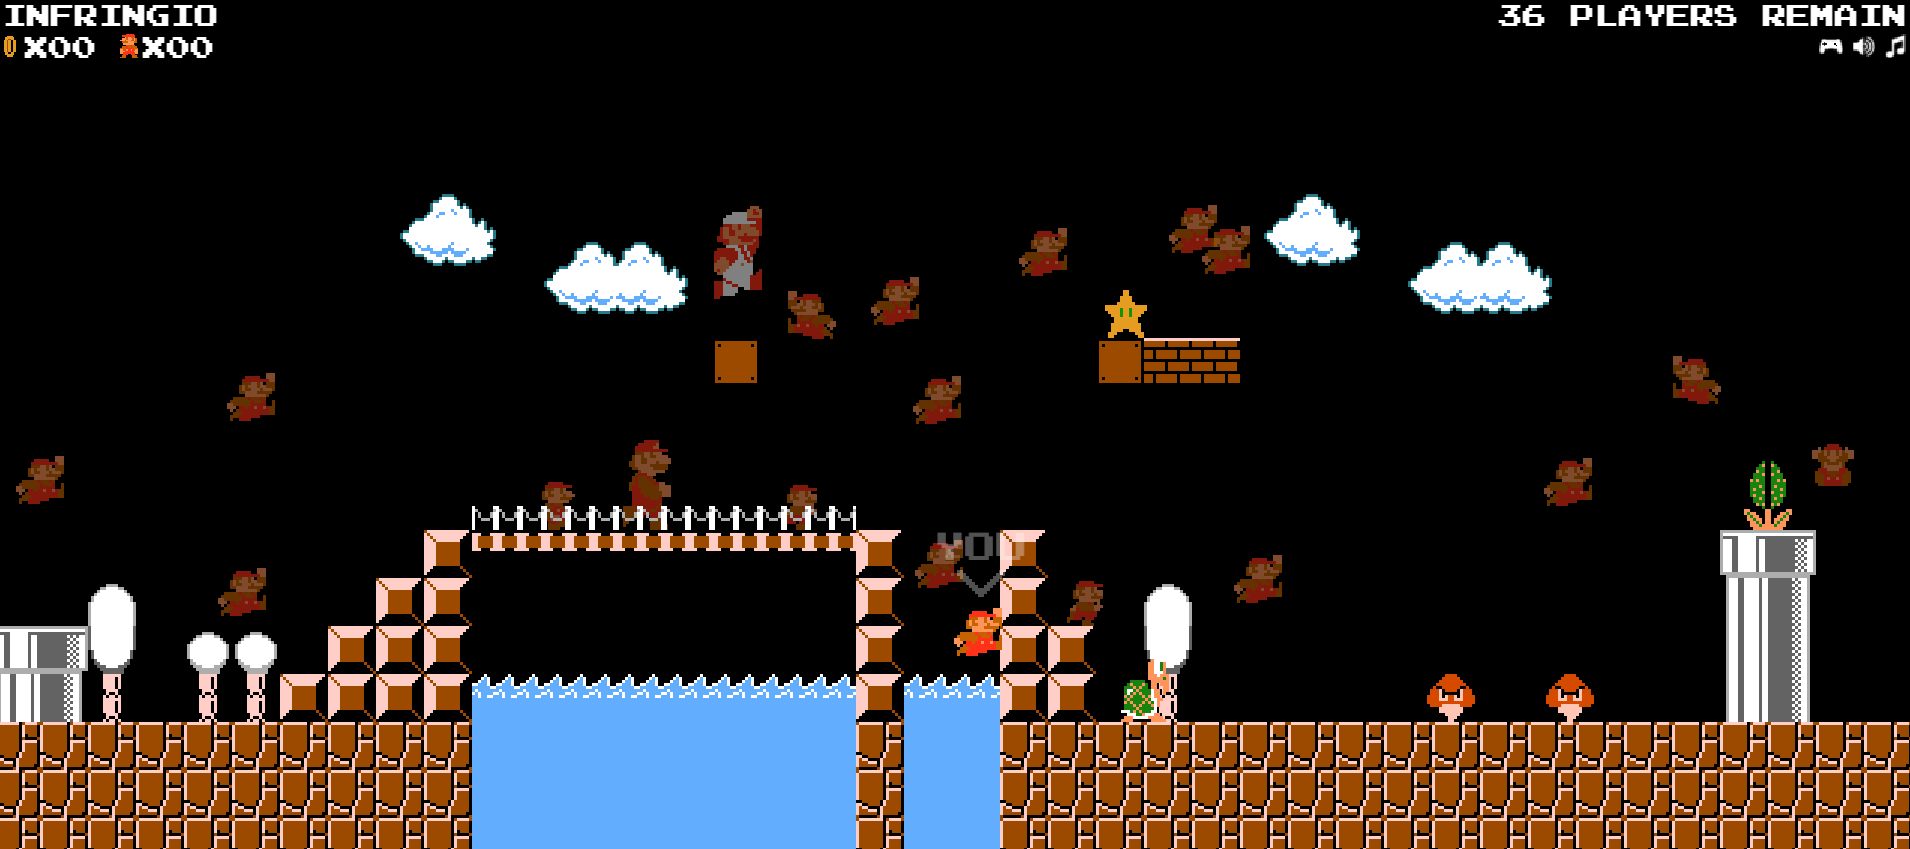 Super Mario Bros Battle Royale Game Releases for Free